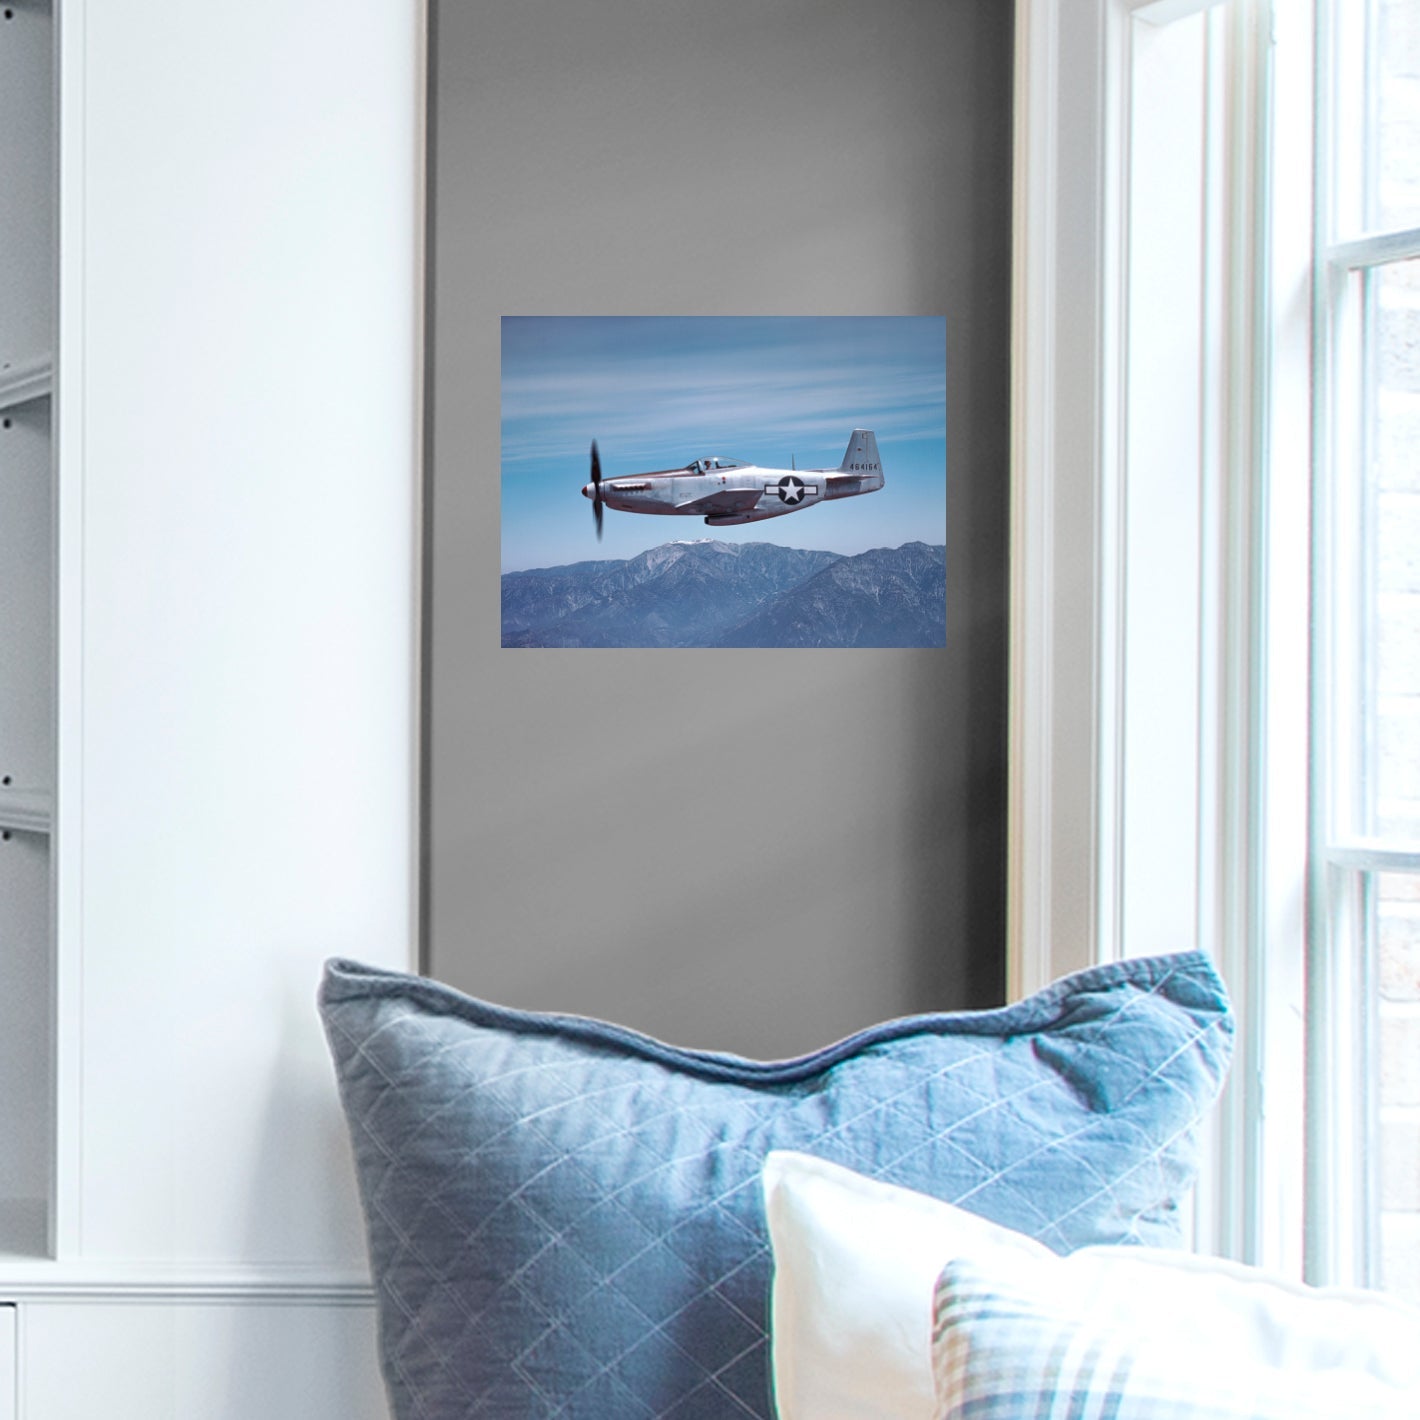 Boeing: Boeing 84-171c Poster - Officially Licensed Boeing Removable Adhesive Decal